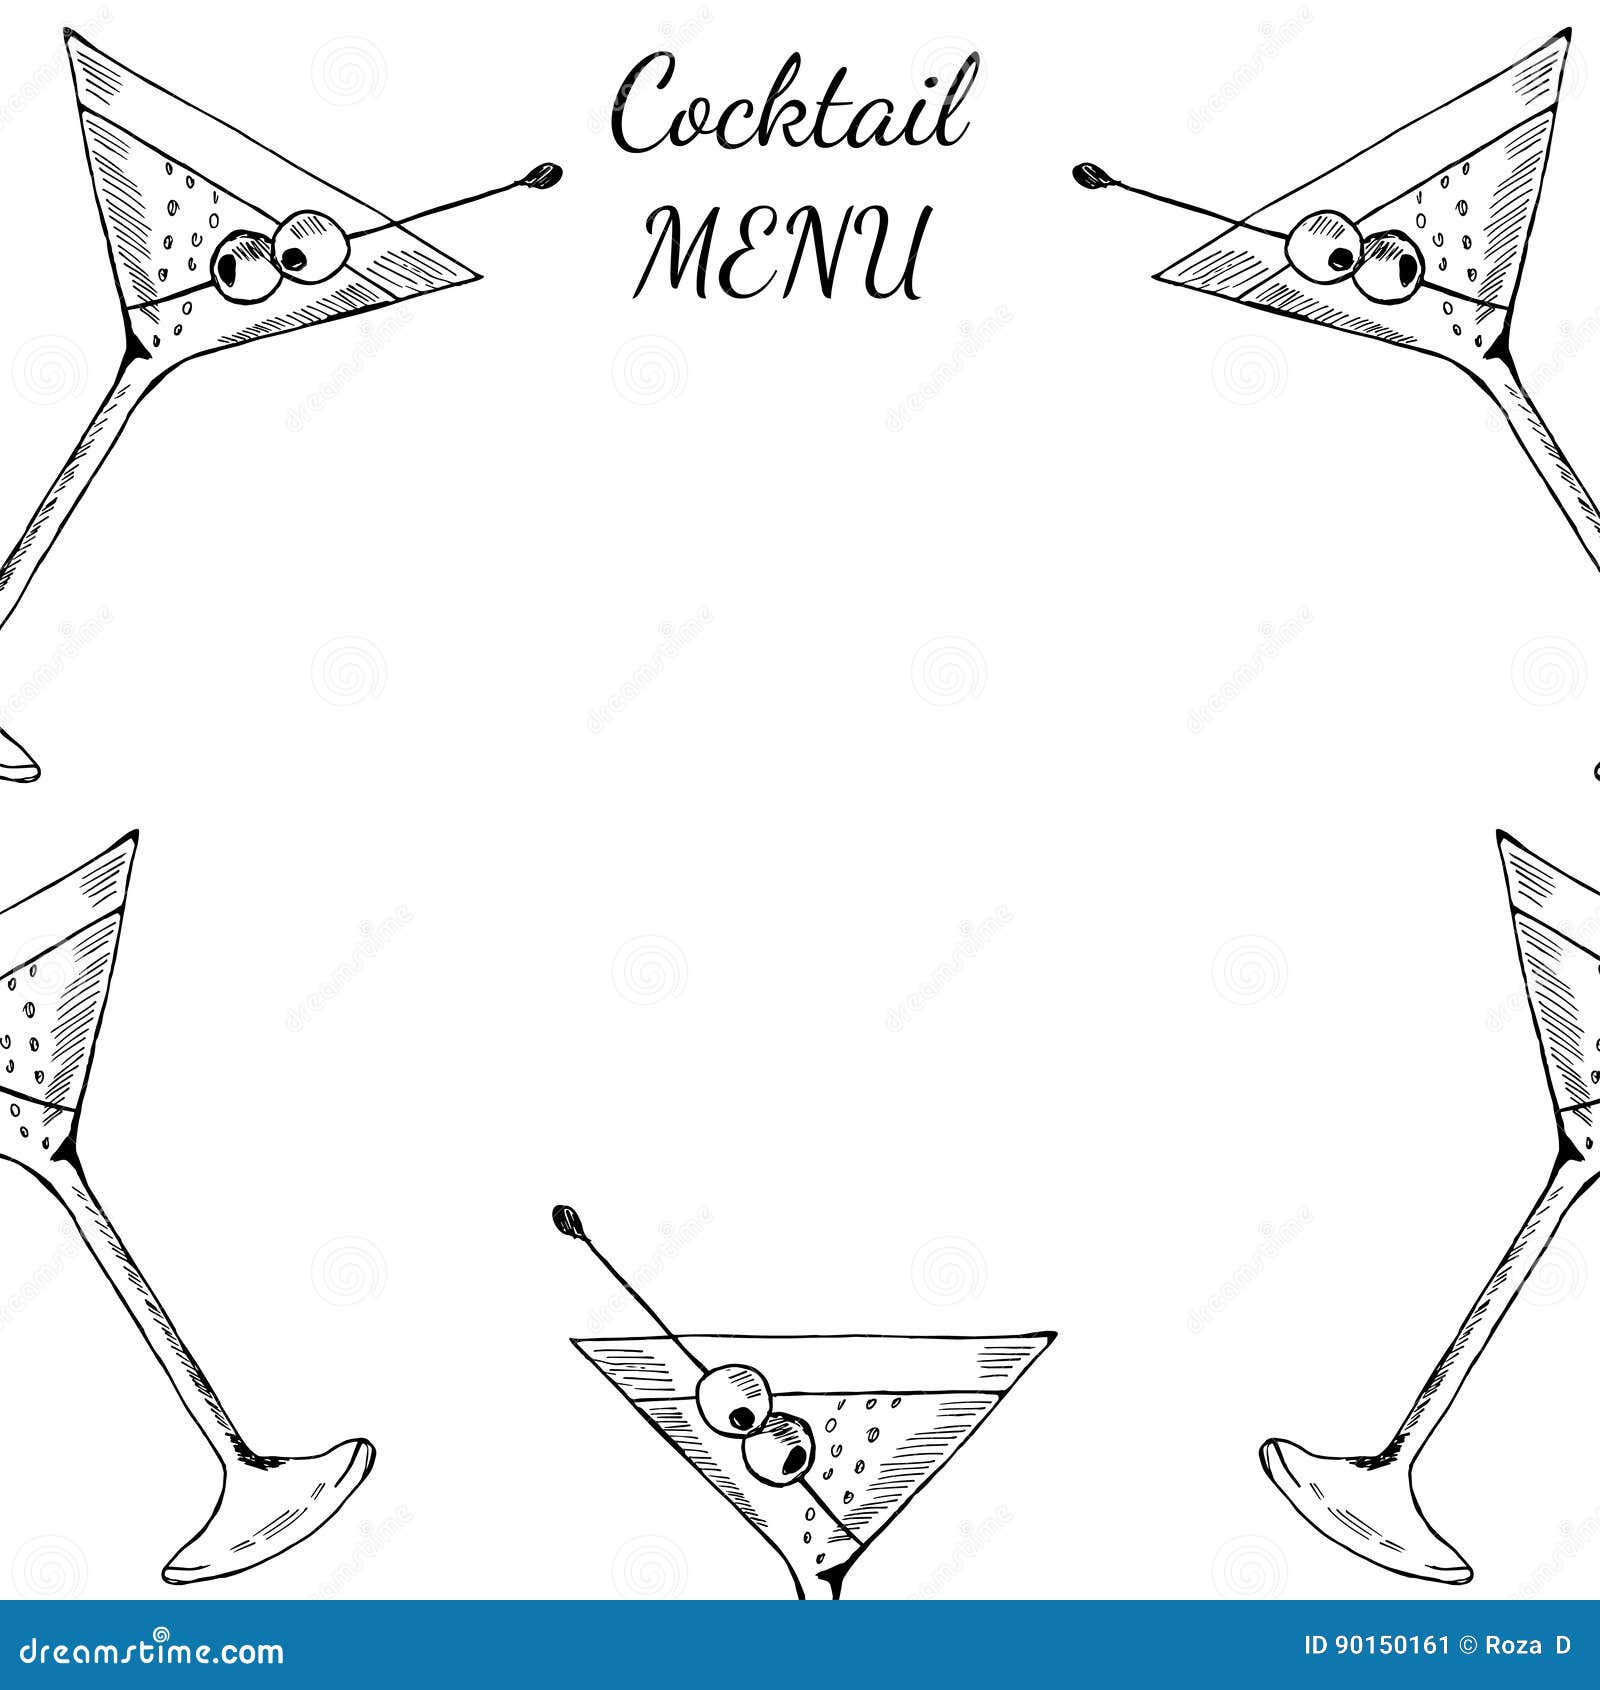 Martini, Cocktails menu stock vector. Illustration of cocktails In Cocktail Menu Template Word Free